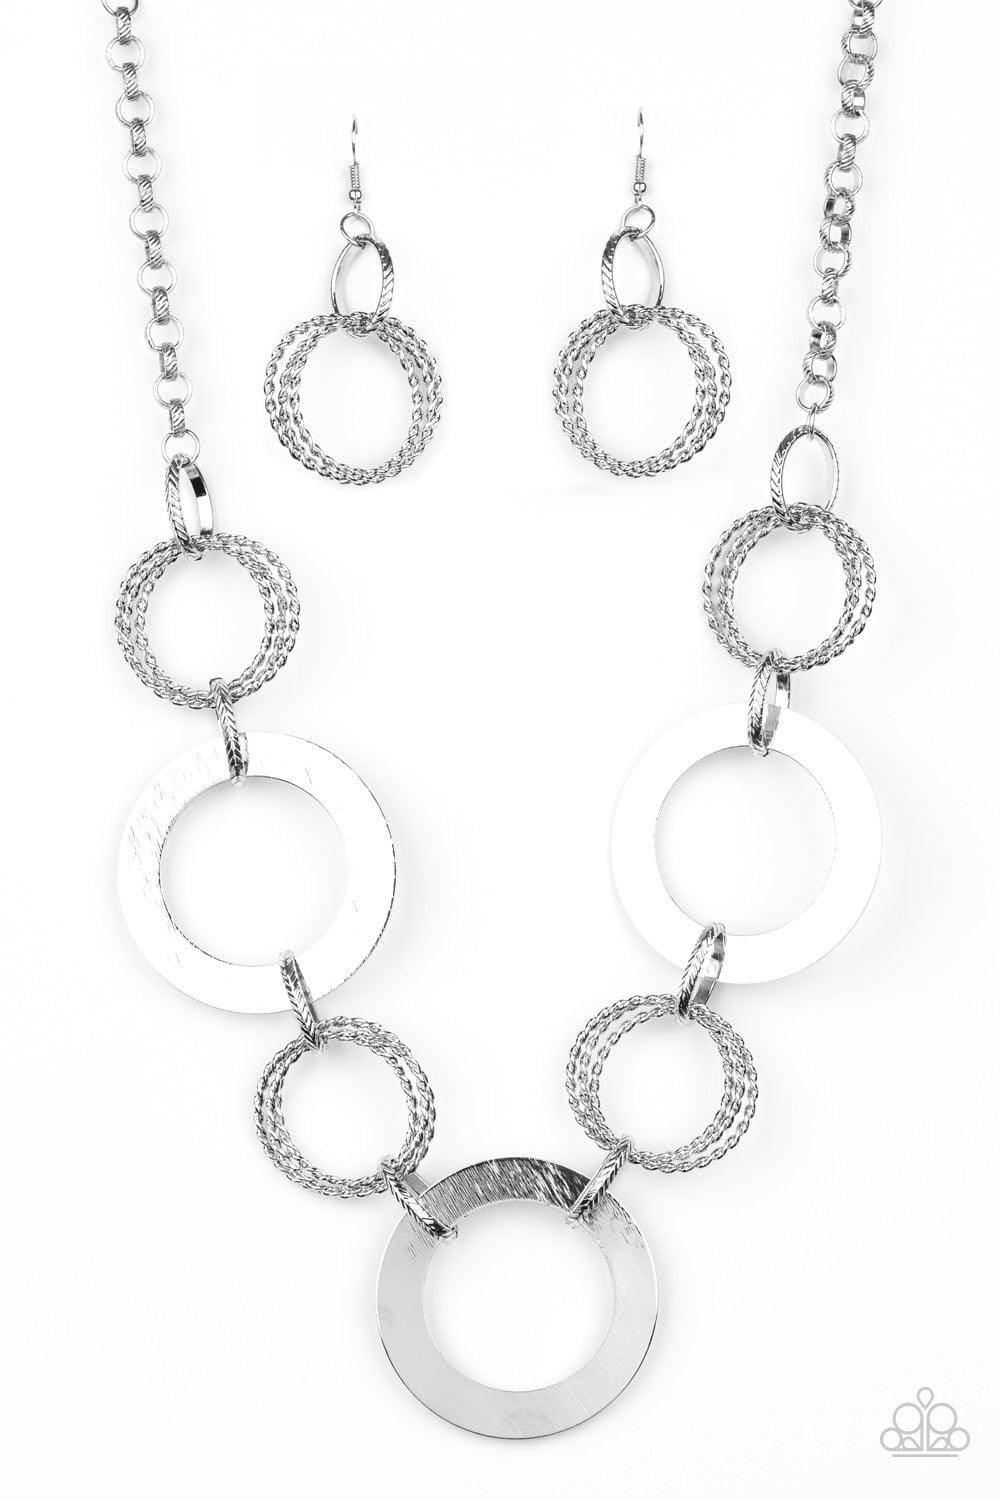 Paparazzi Accessories - Ringed In Radiance - Silver Necklace - Bling by JessieK